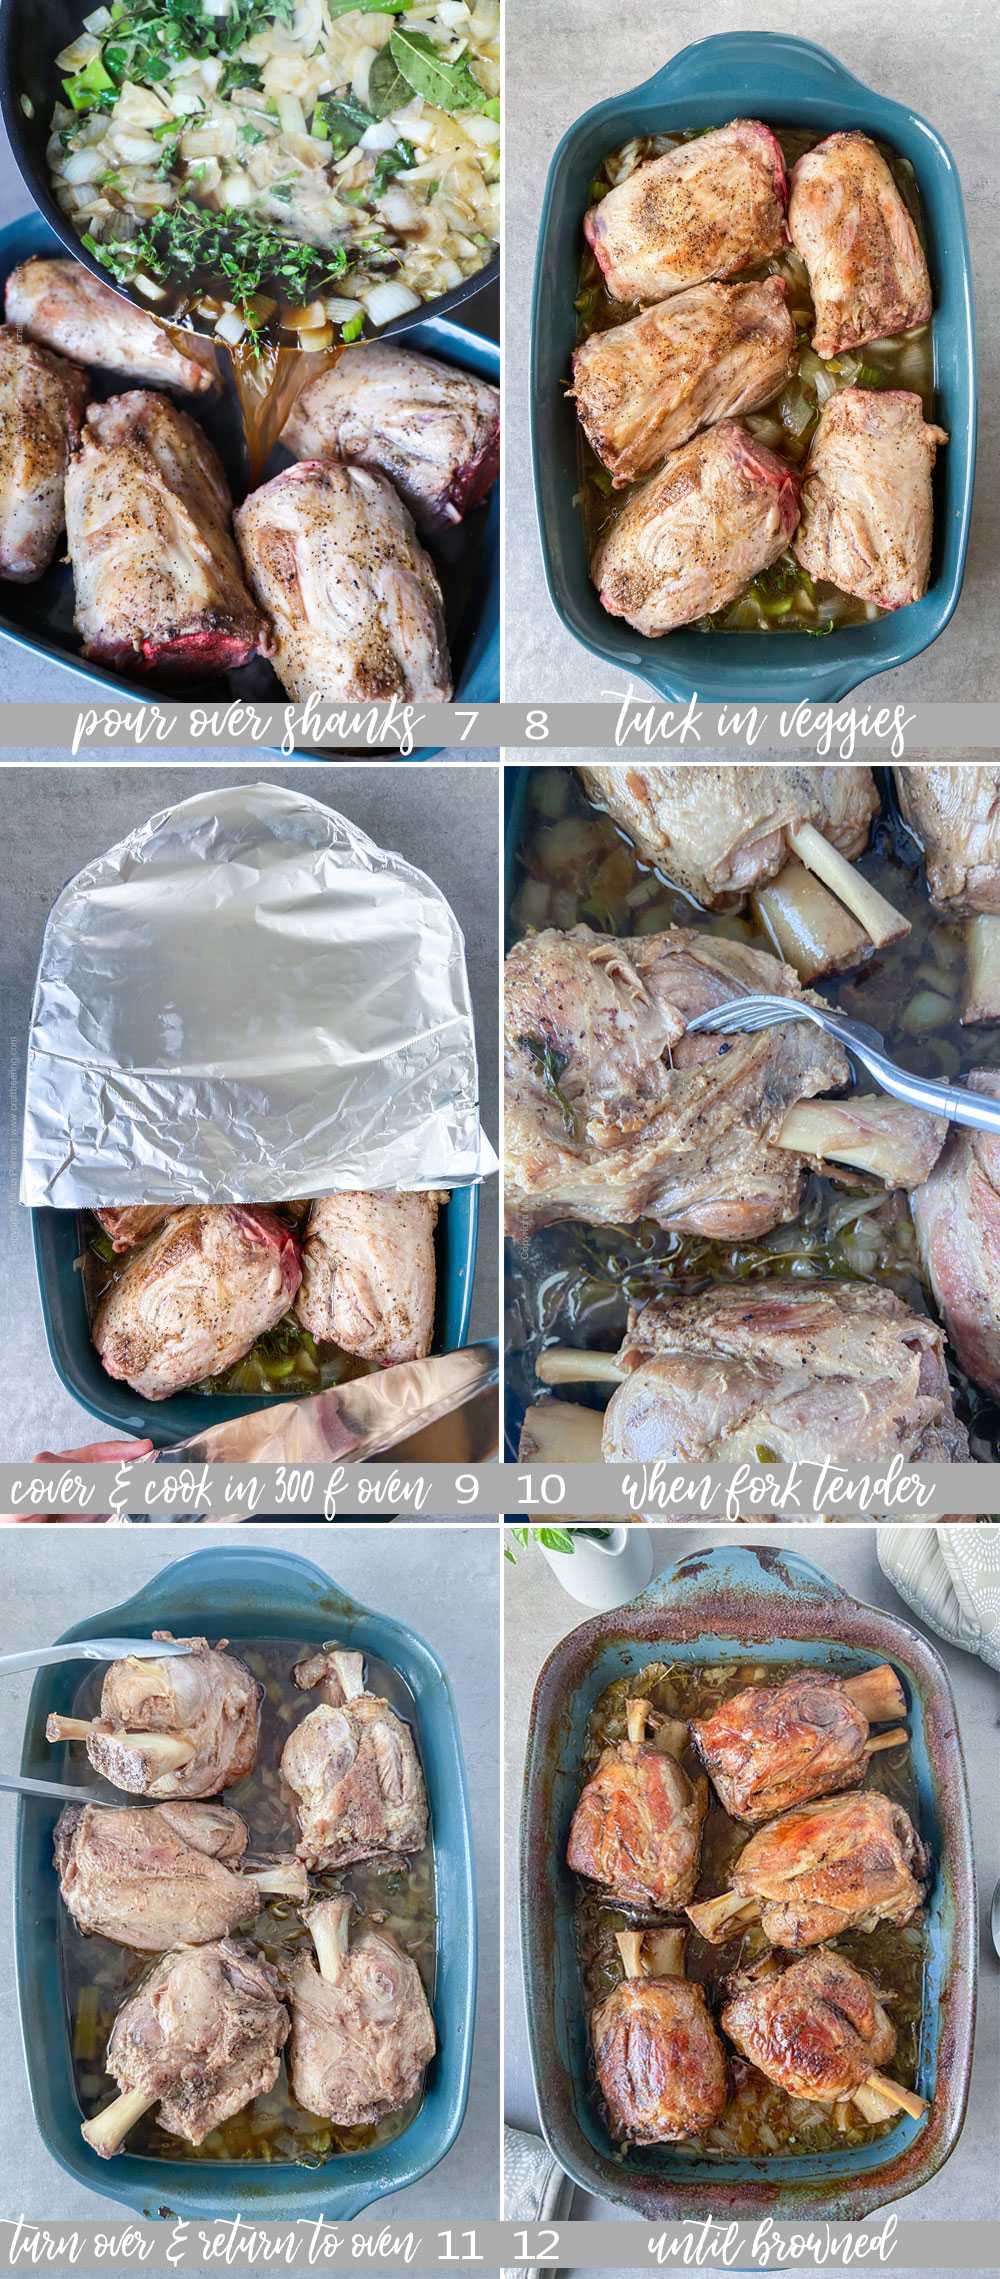 How to braise pork shank in the oven - step by step - part 2